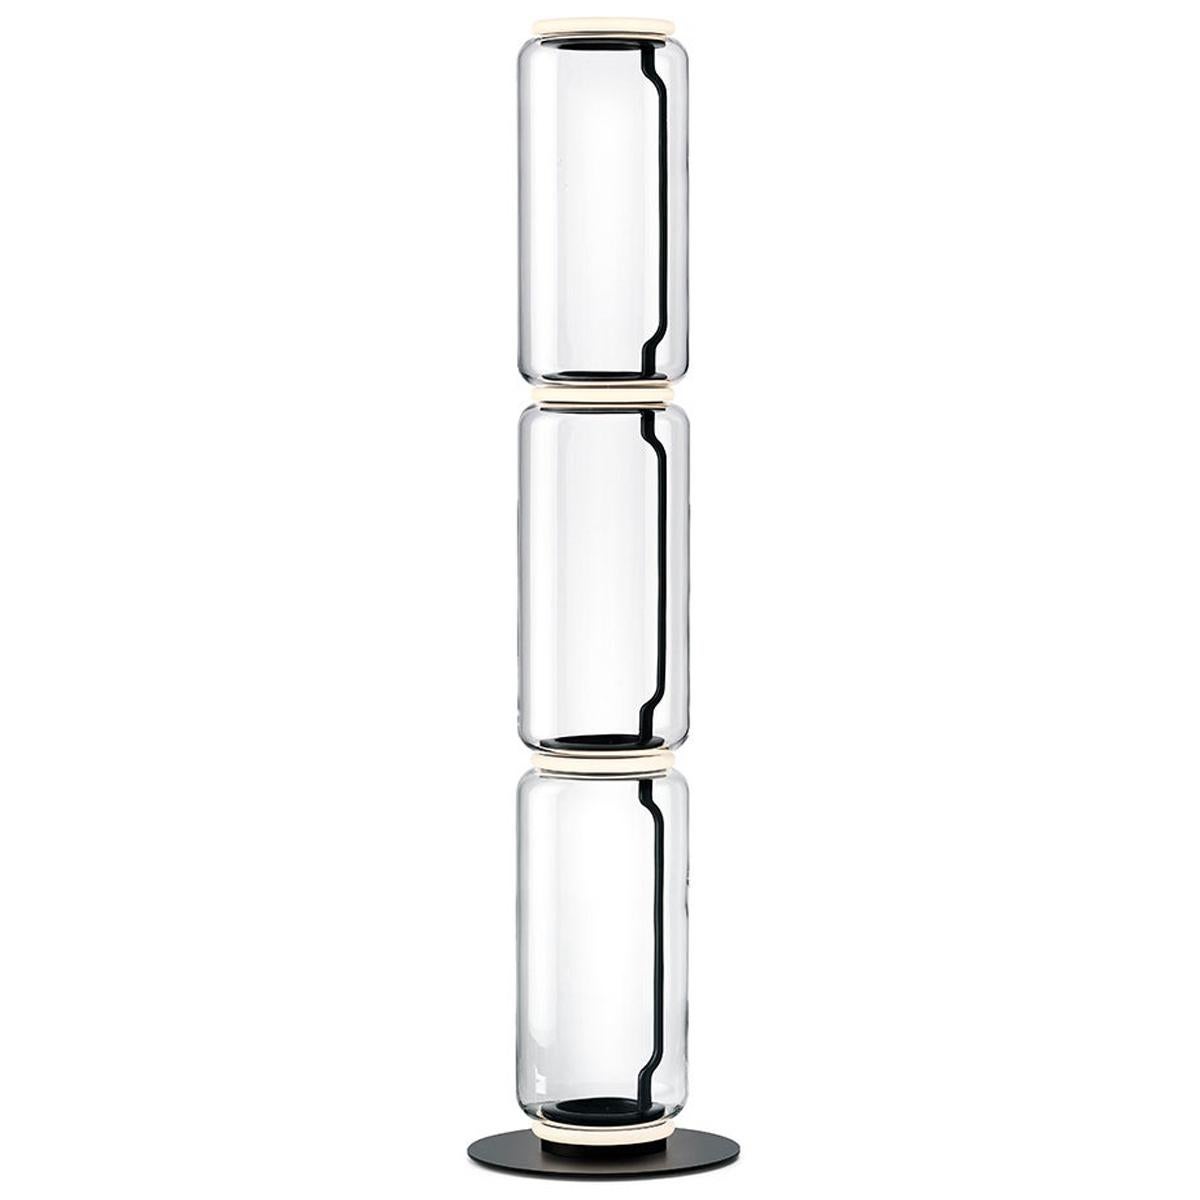 Flos Noctambule Floor Lamp with 3 High Cylinders and Base by Konstantin Grcic